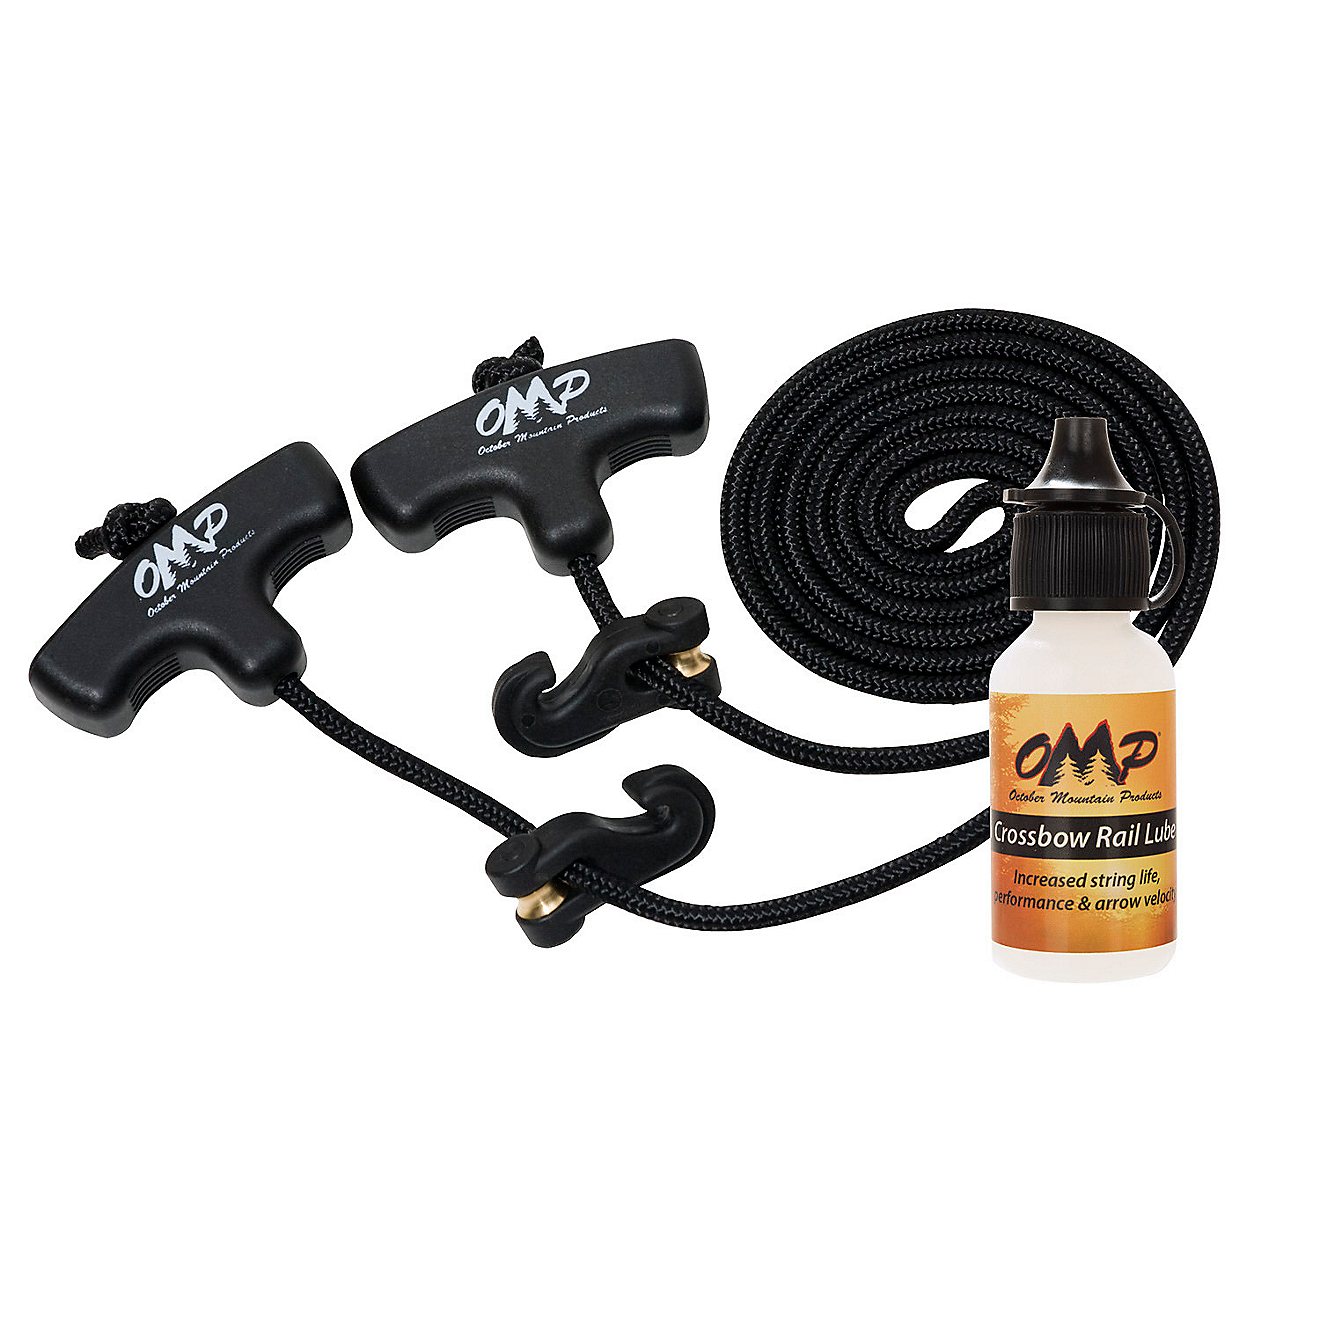 October Mountain Products Universal Crossbow Cocking Aid and Rail Lube Set                                                       - view number 1